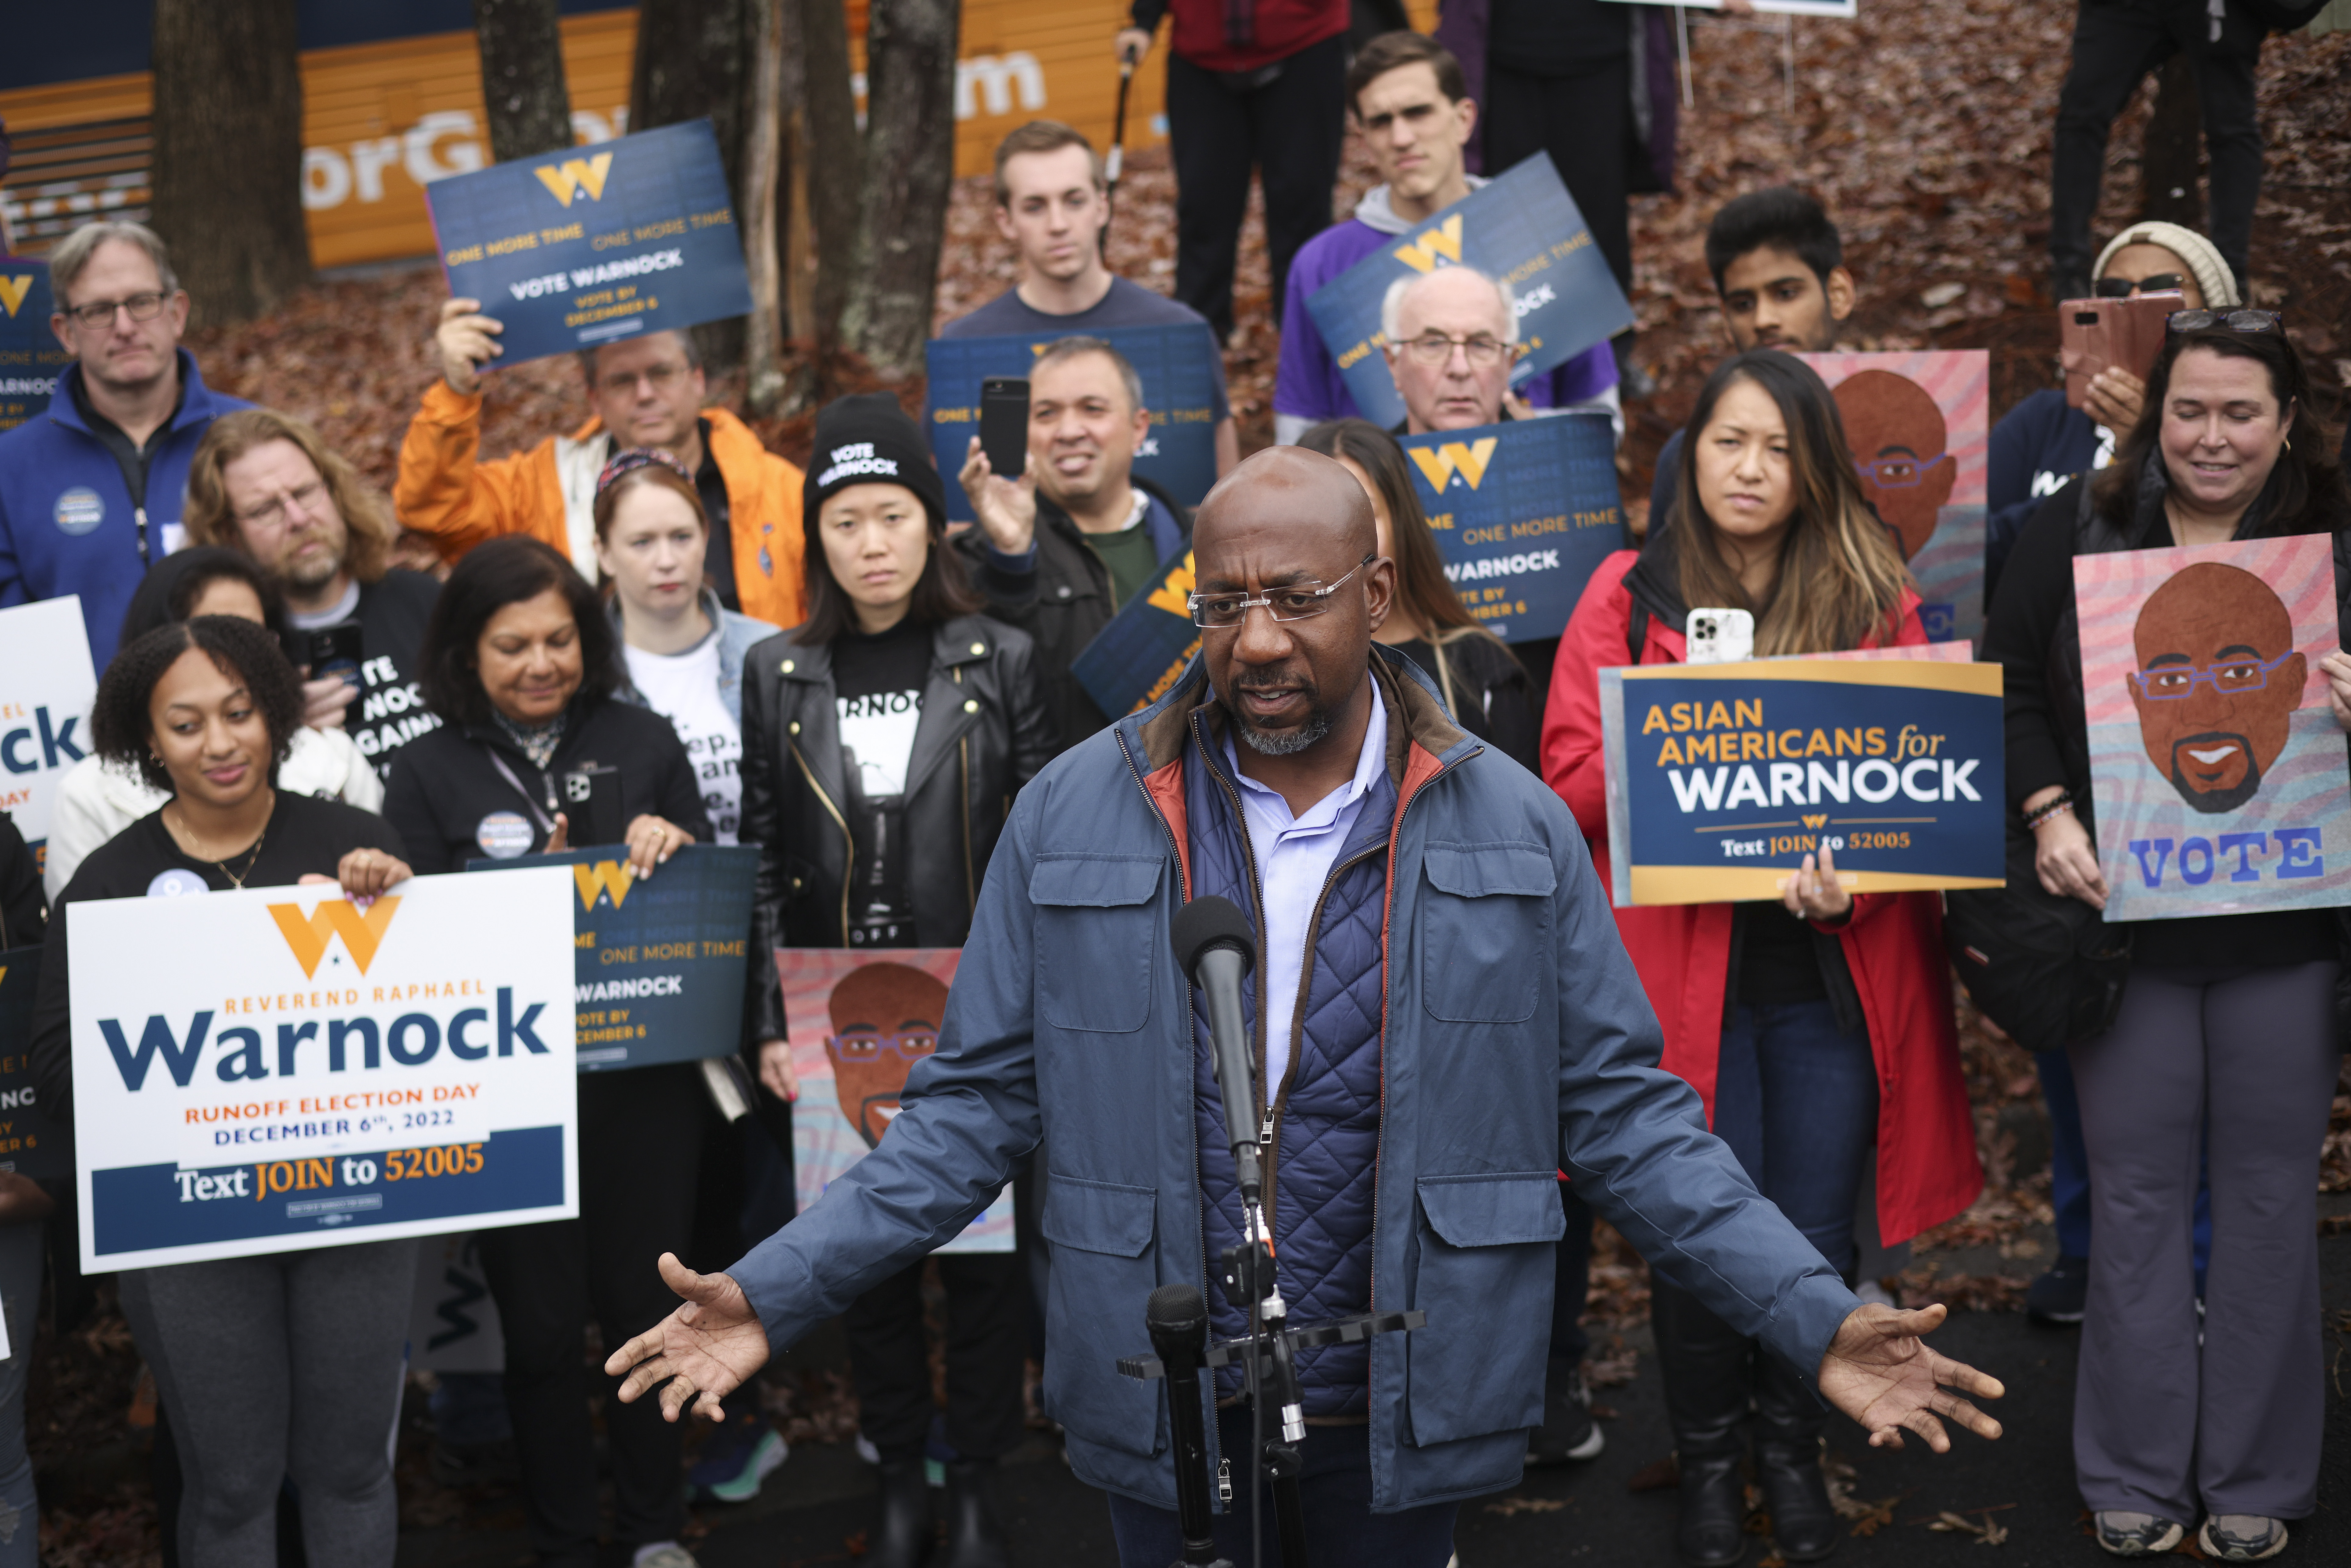 Georgia Democratic Senate candidate U.S. Sen. Raphael Warnock speaks to supporters during a pre-canvassing event December 6, 2022 in Norcross, Georgia. Sen. Warnock is competing in a runoff election being held today against his Republican challenger Herschel Walker.